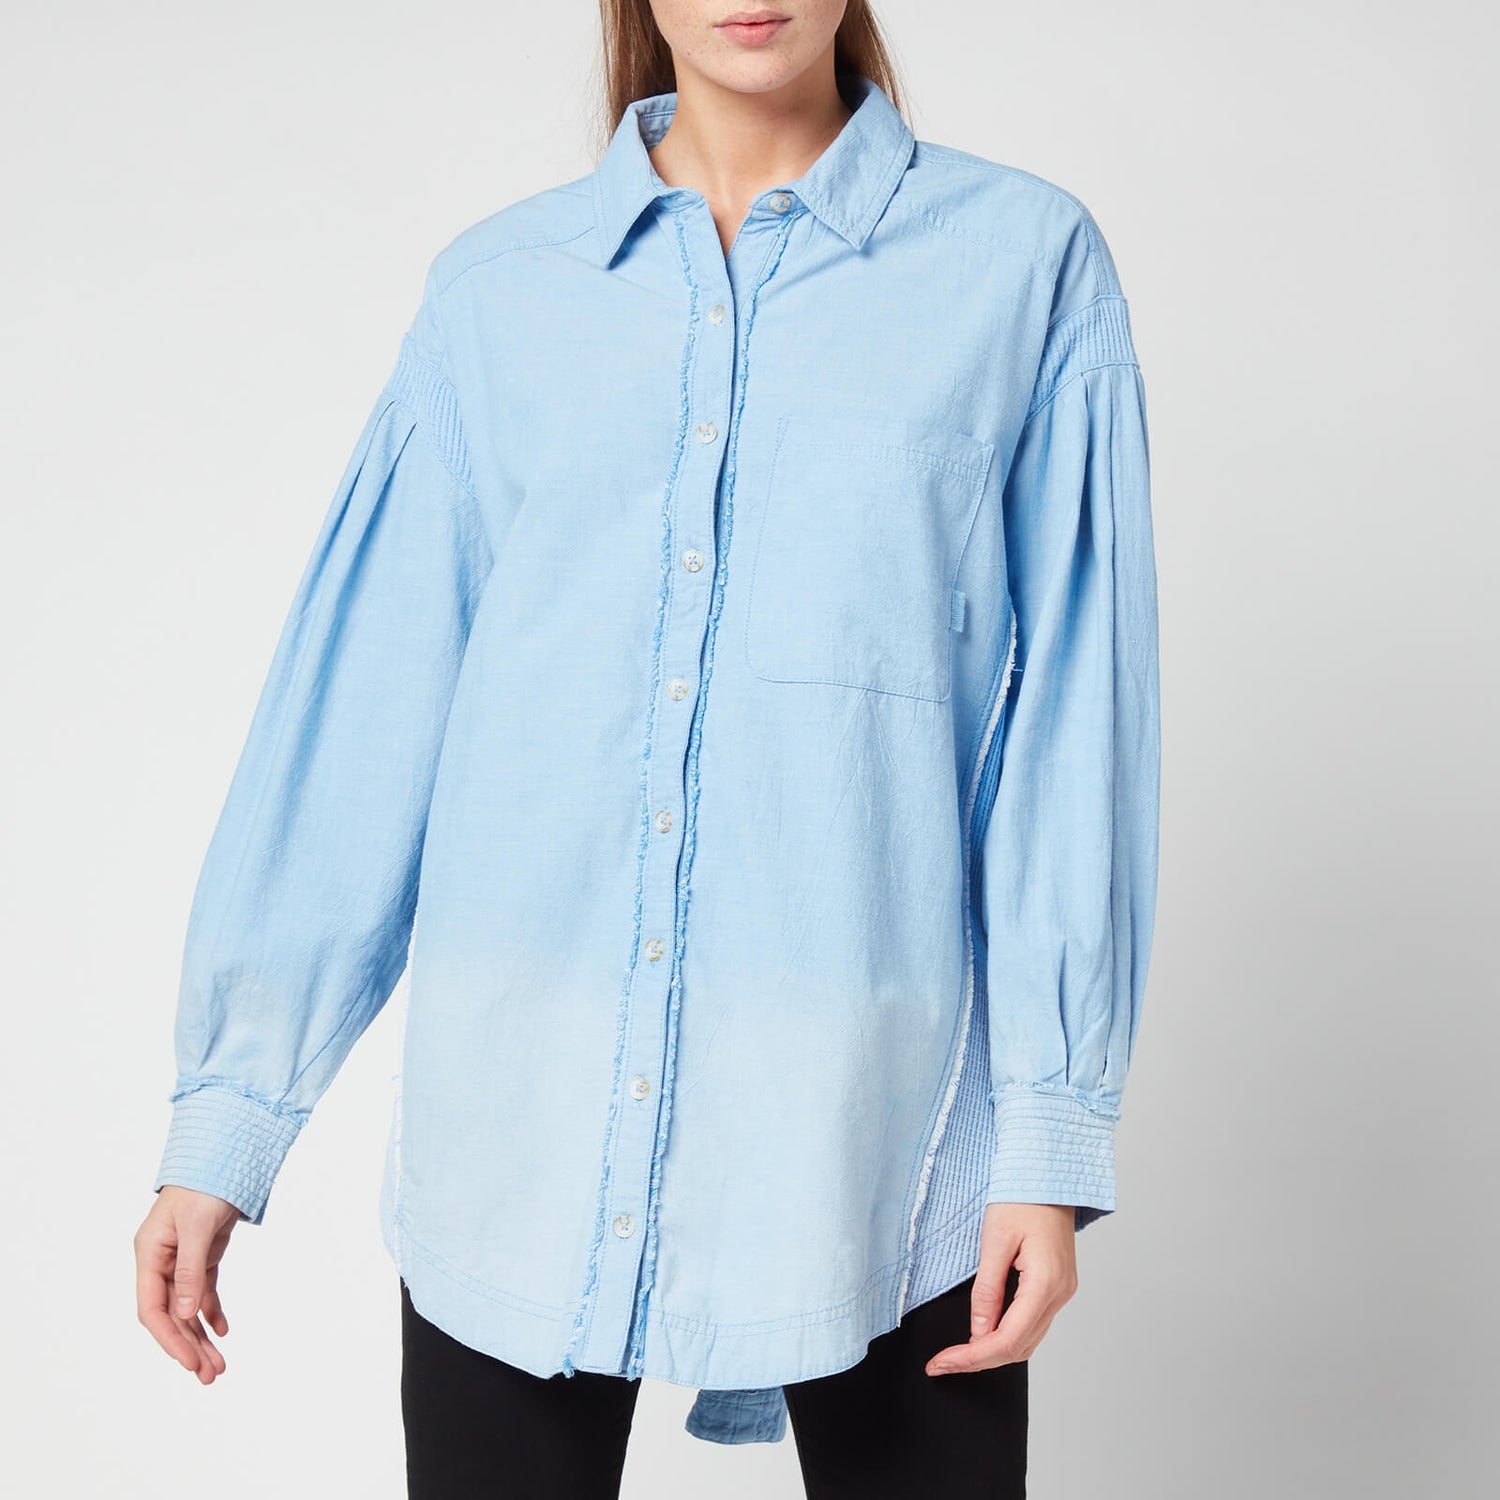 Free People Women's Cool & Clean B/D Solid Shirt - Blue Arrow